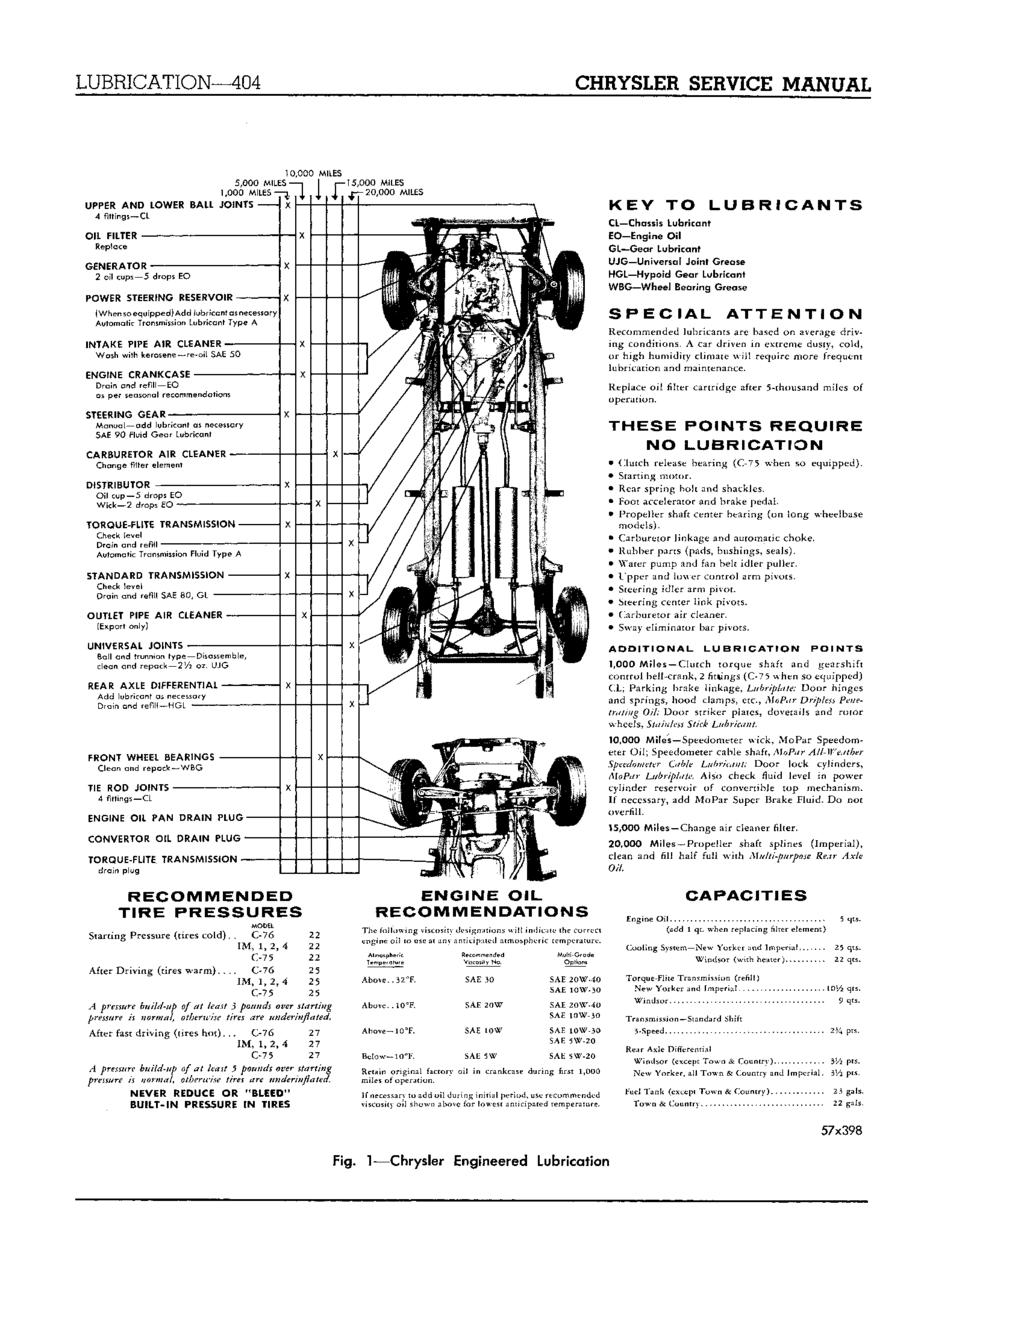 LUBRICATION 404 CHRYSLER SERVICE MANUAL 10,000 MILES 5,000 MILES 1 j j 15,,000 MILES 1,000 MILES III 20,000 MILES UPPER AND LOWER BALL JOINTS 4 fittings CL K E Y TO L U B R I C A N T S CL Chassis